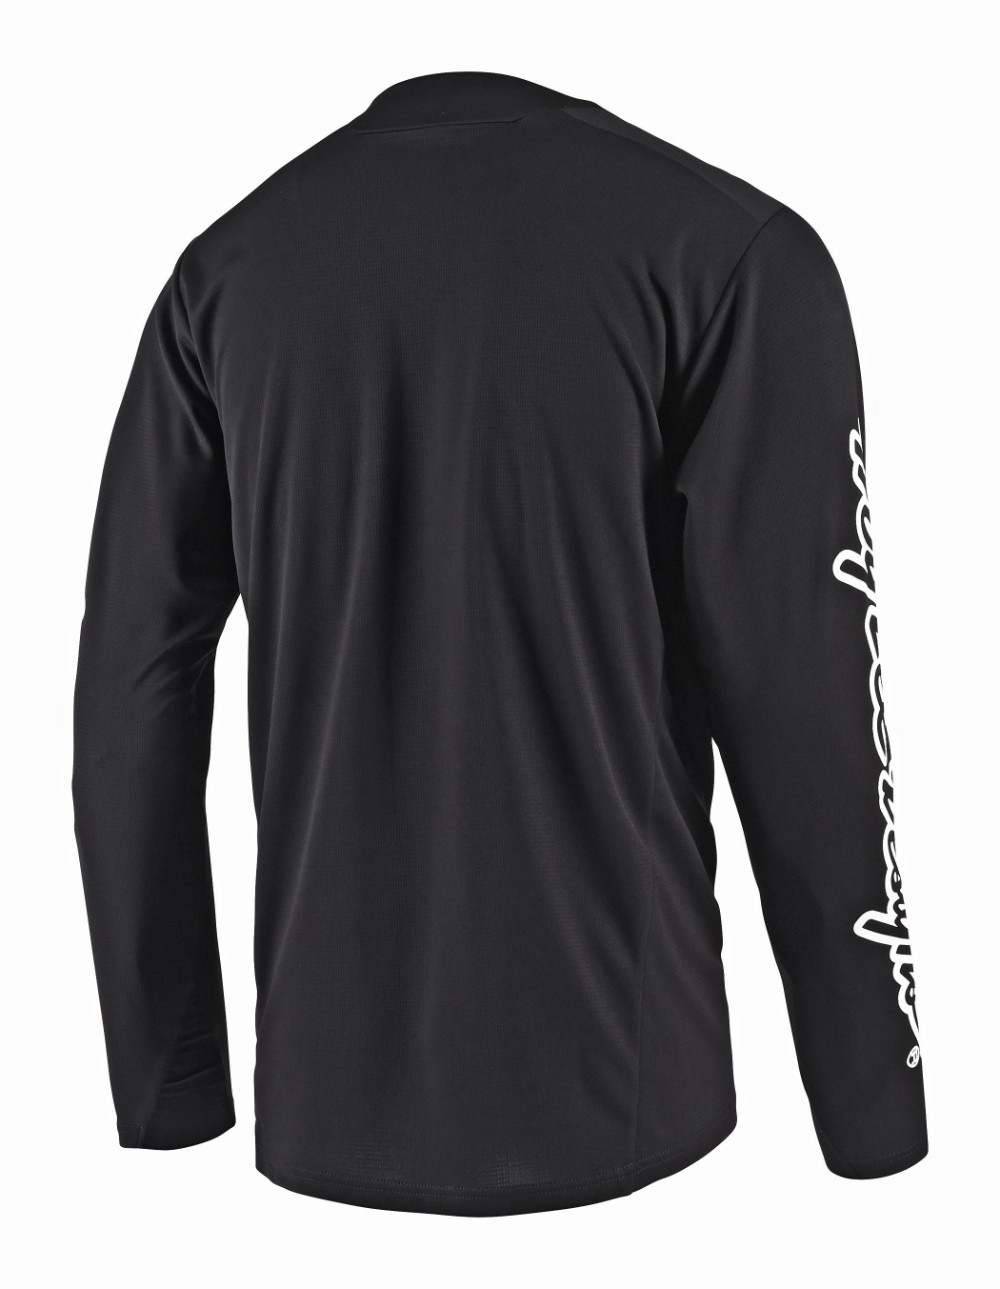 Sprint Youth Long Sleeve MTB Cycling Jersey image 1